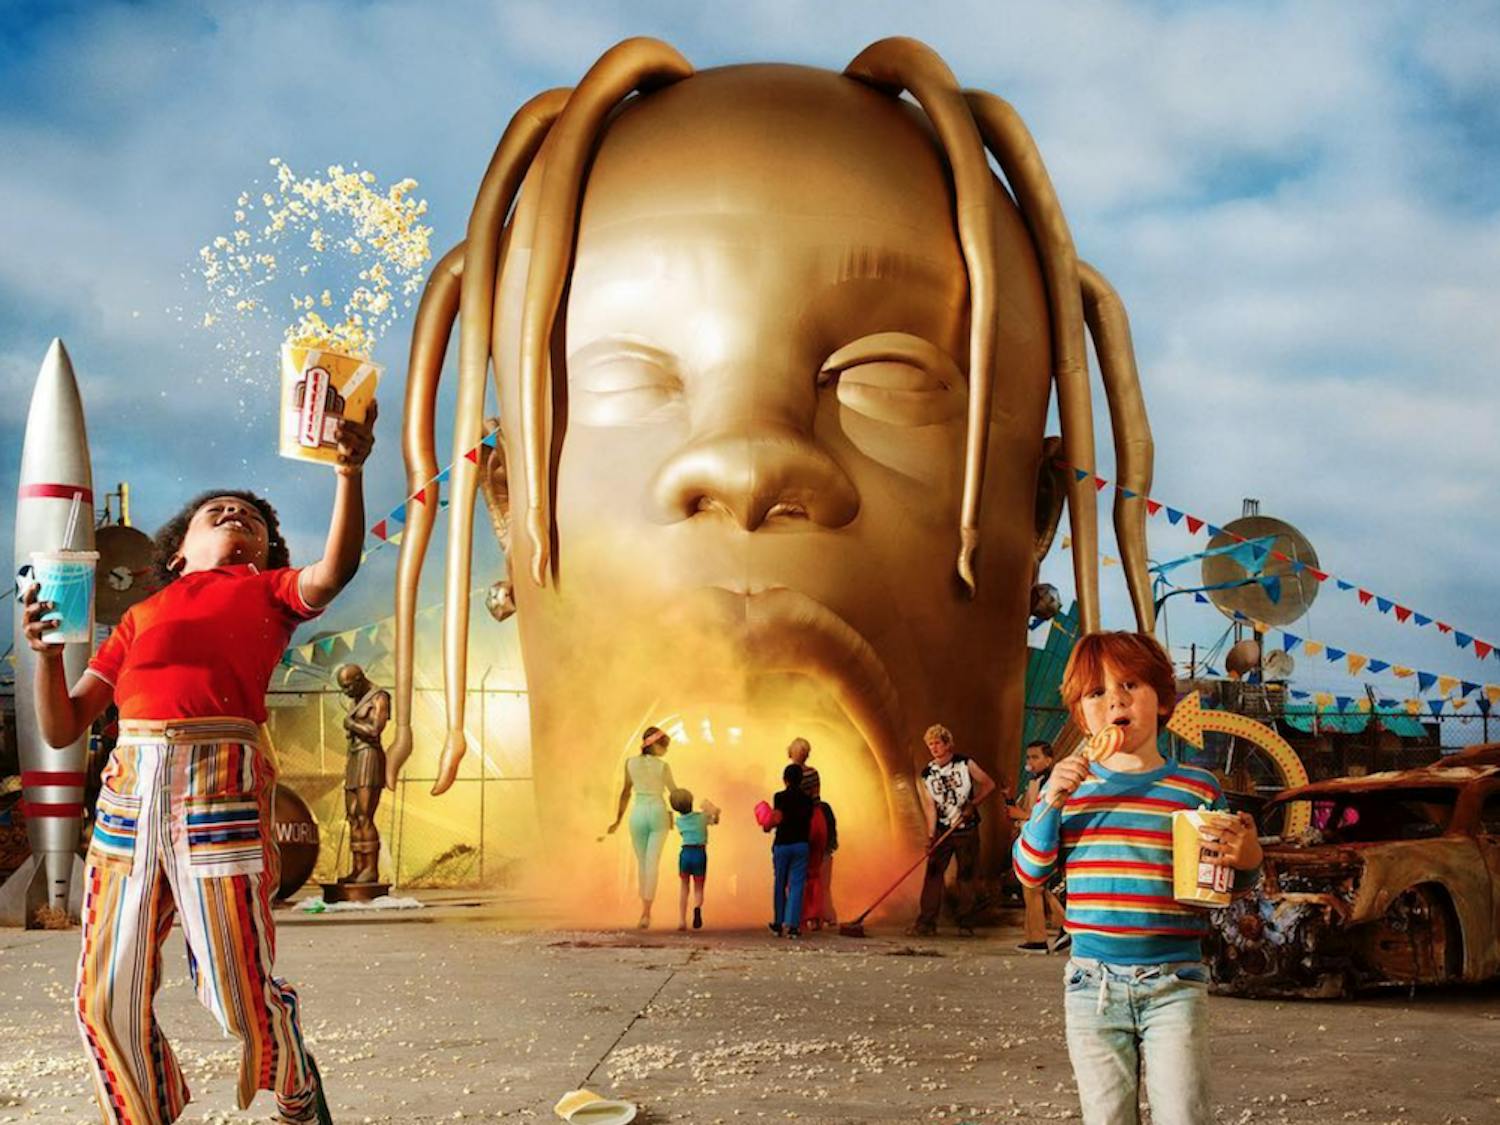 ASTROWORLD puts Travis Scott's curating chops and trap mastery on full display.